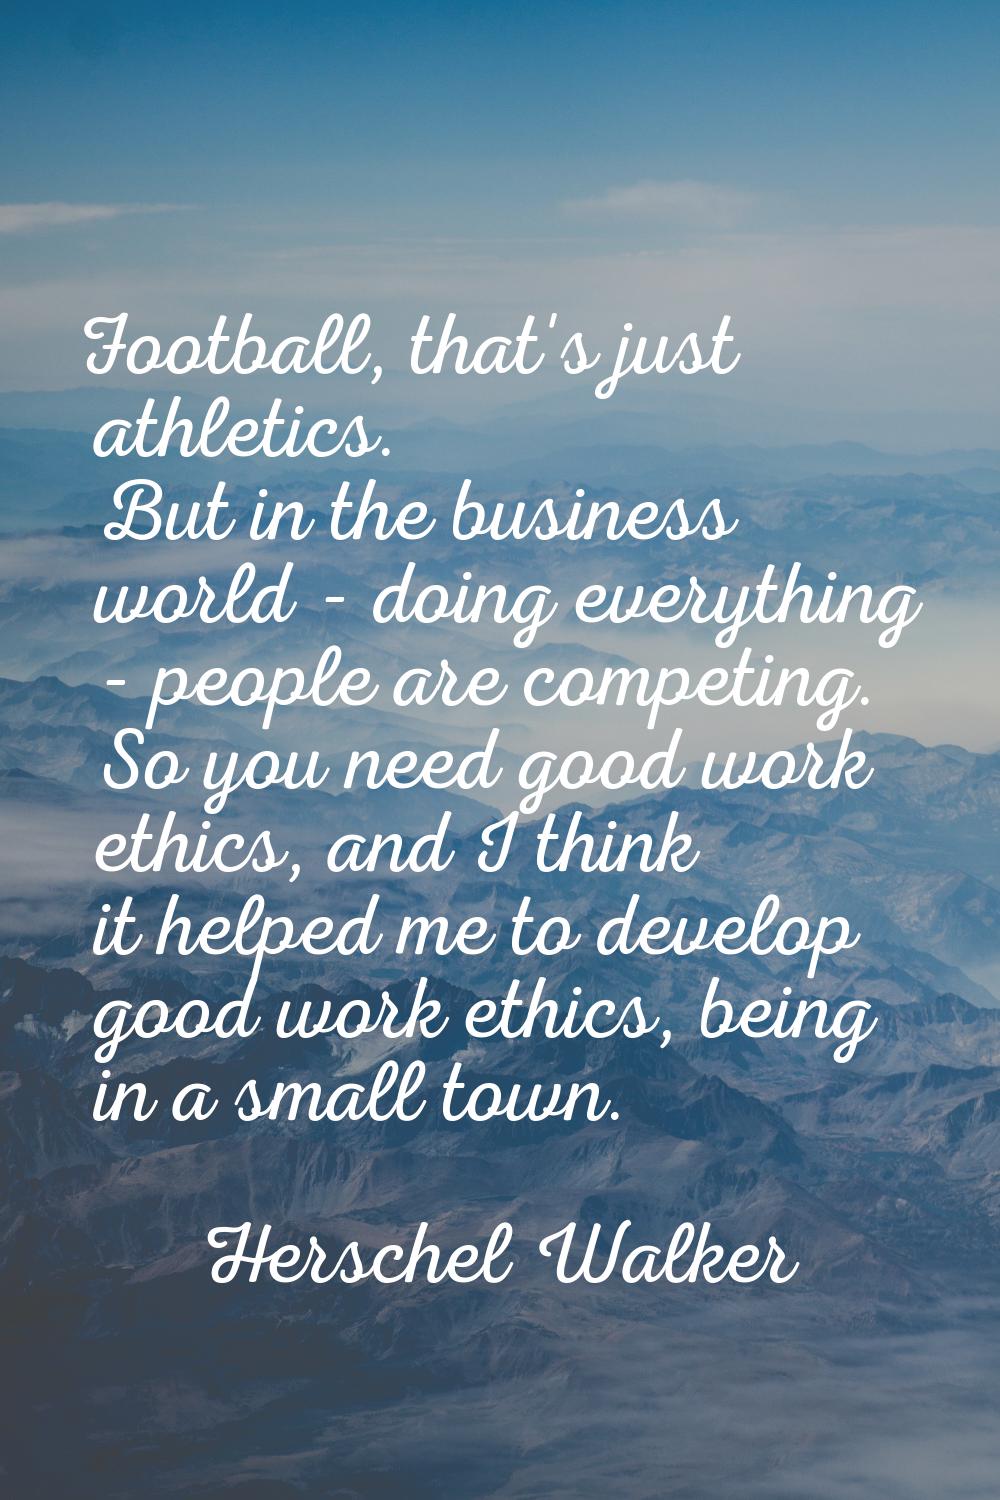 Football, that's just athletics. But in the business world - doing everything - people are competin